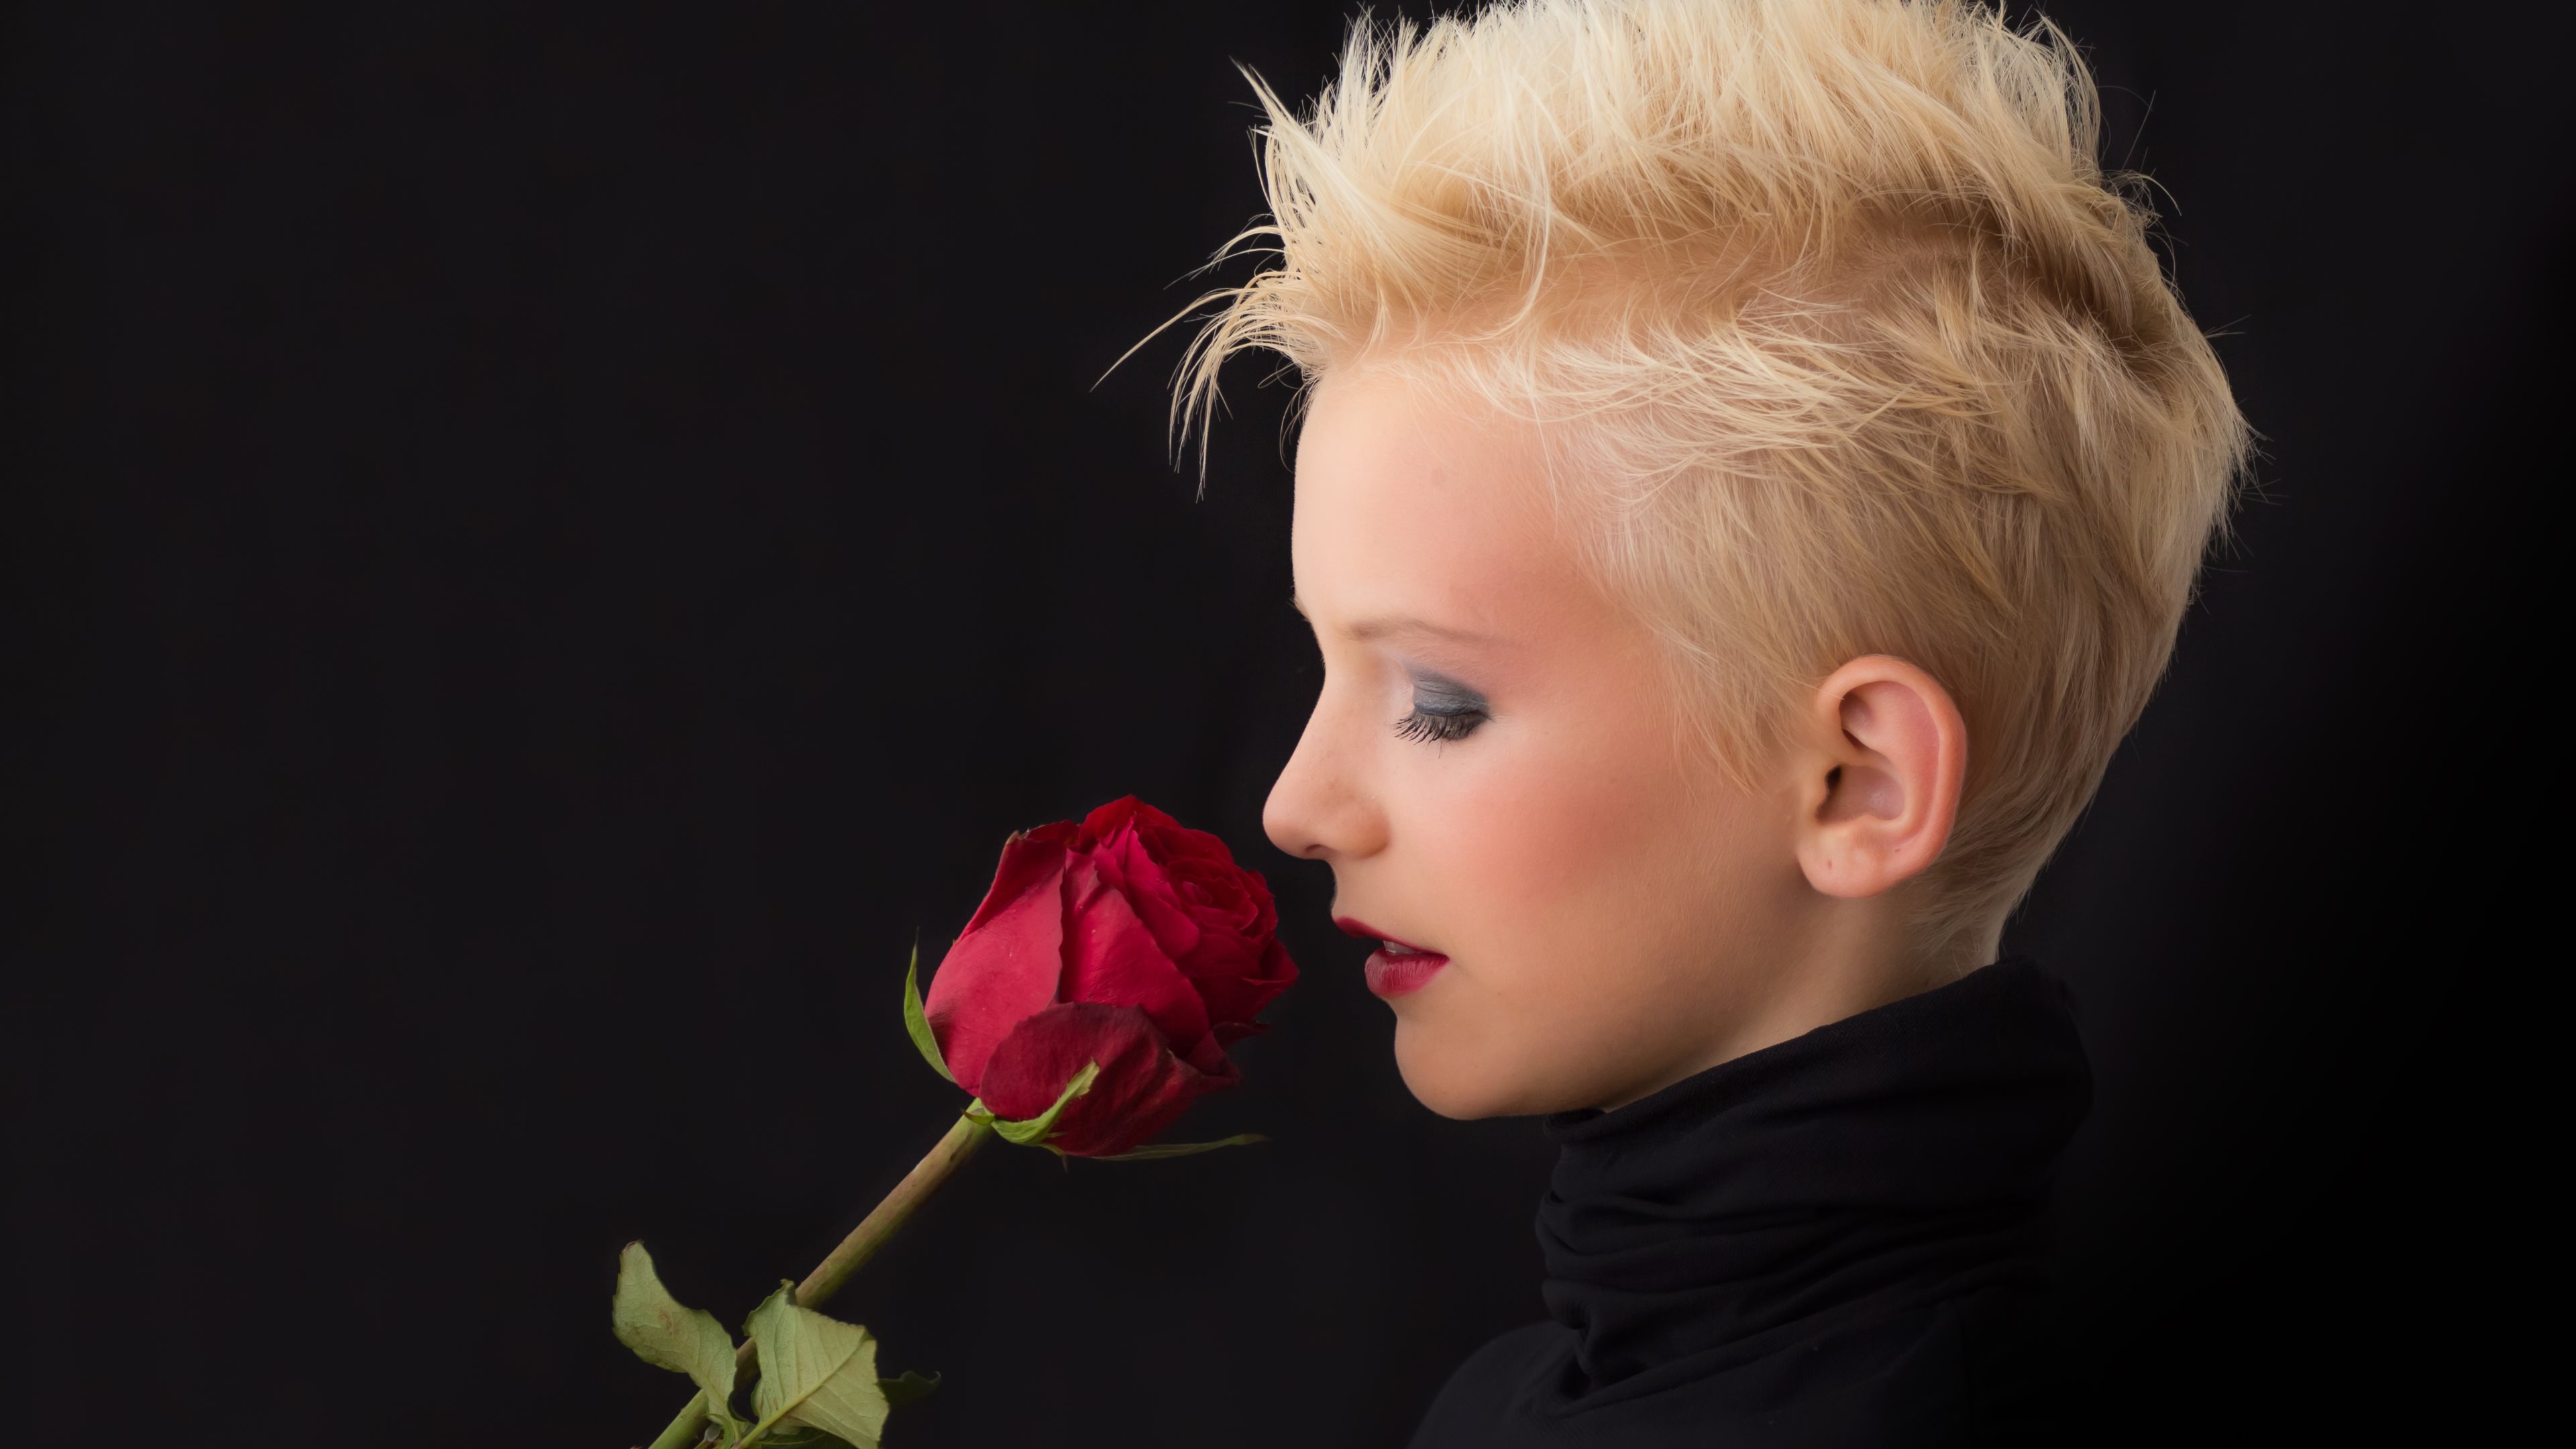 Girl and Red Rose uhd wallpapers   Ultra High Definition Wallpapers